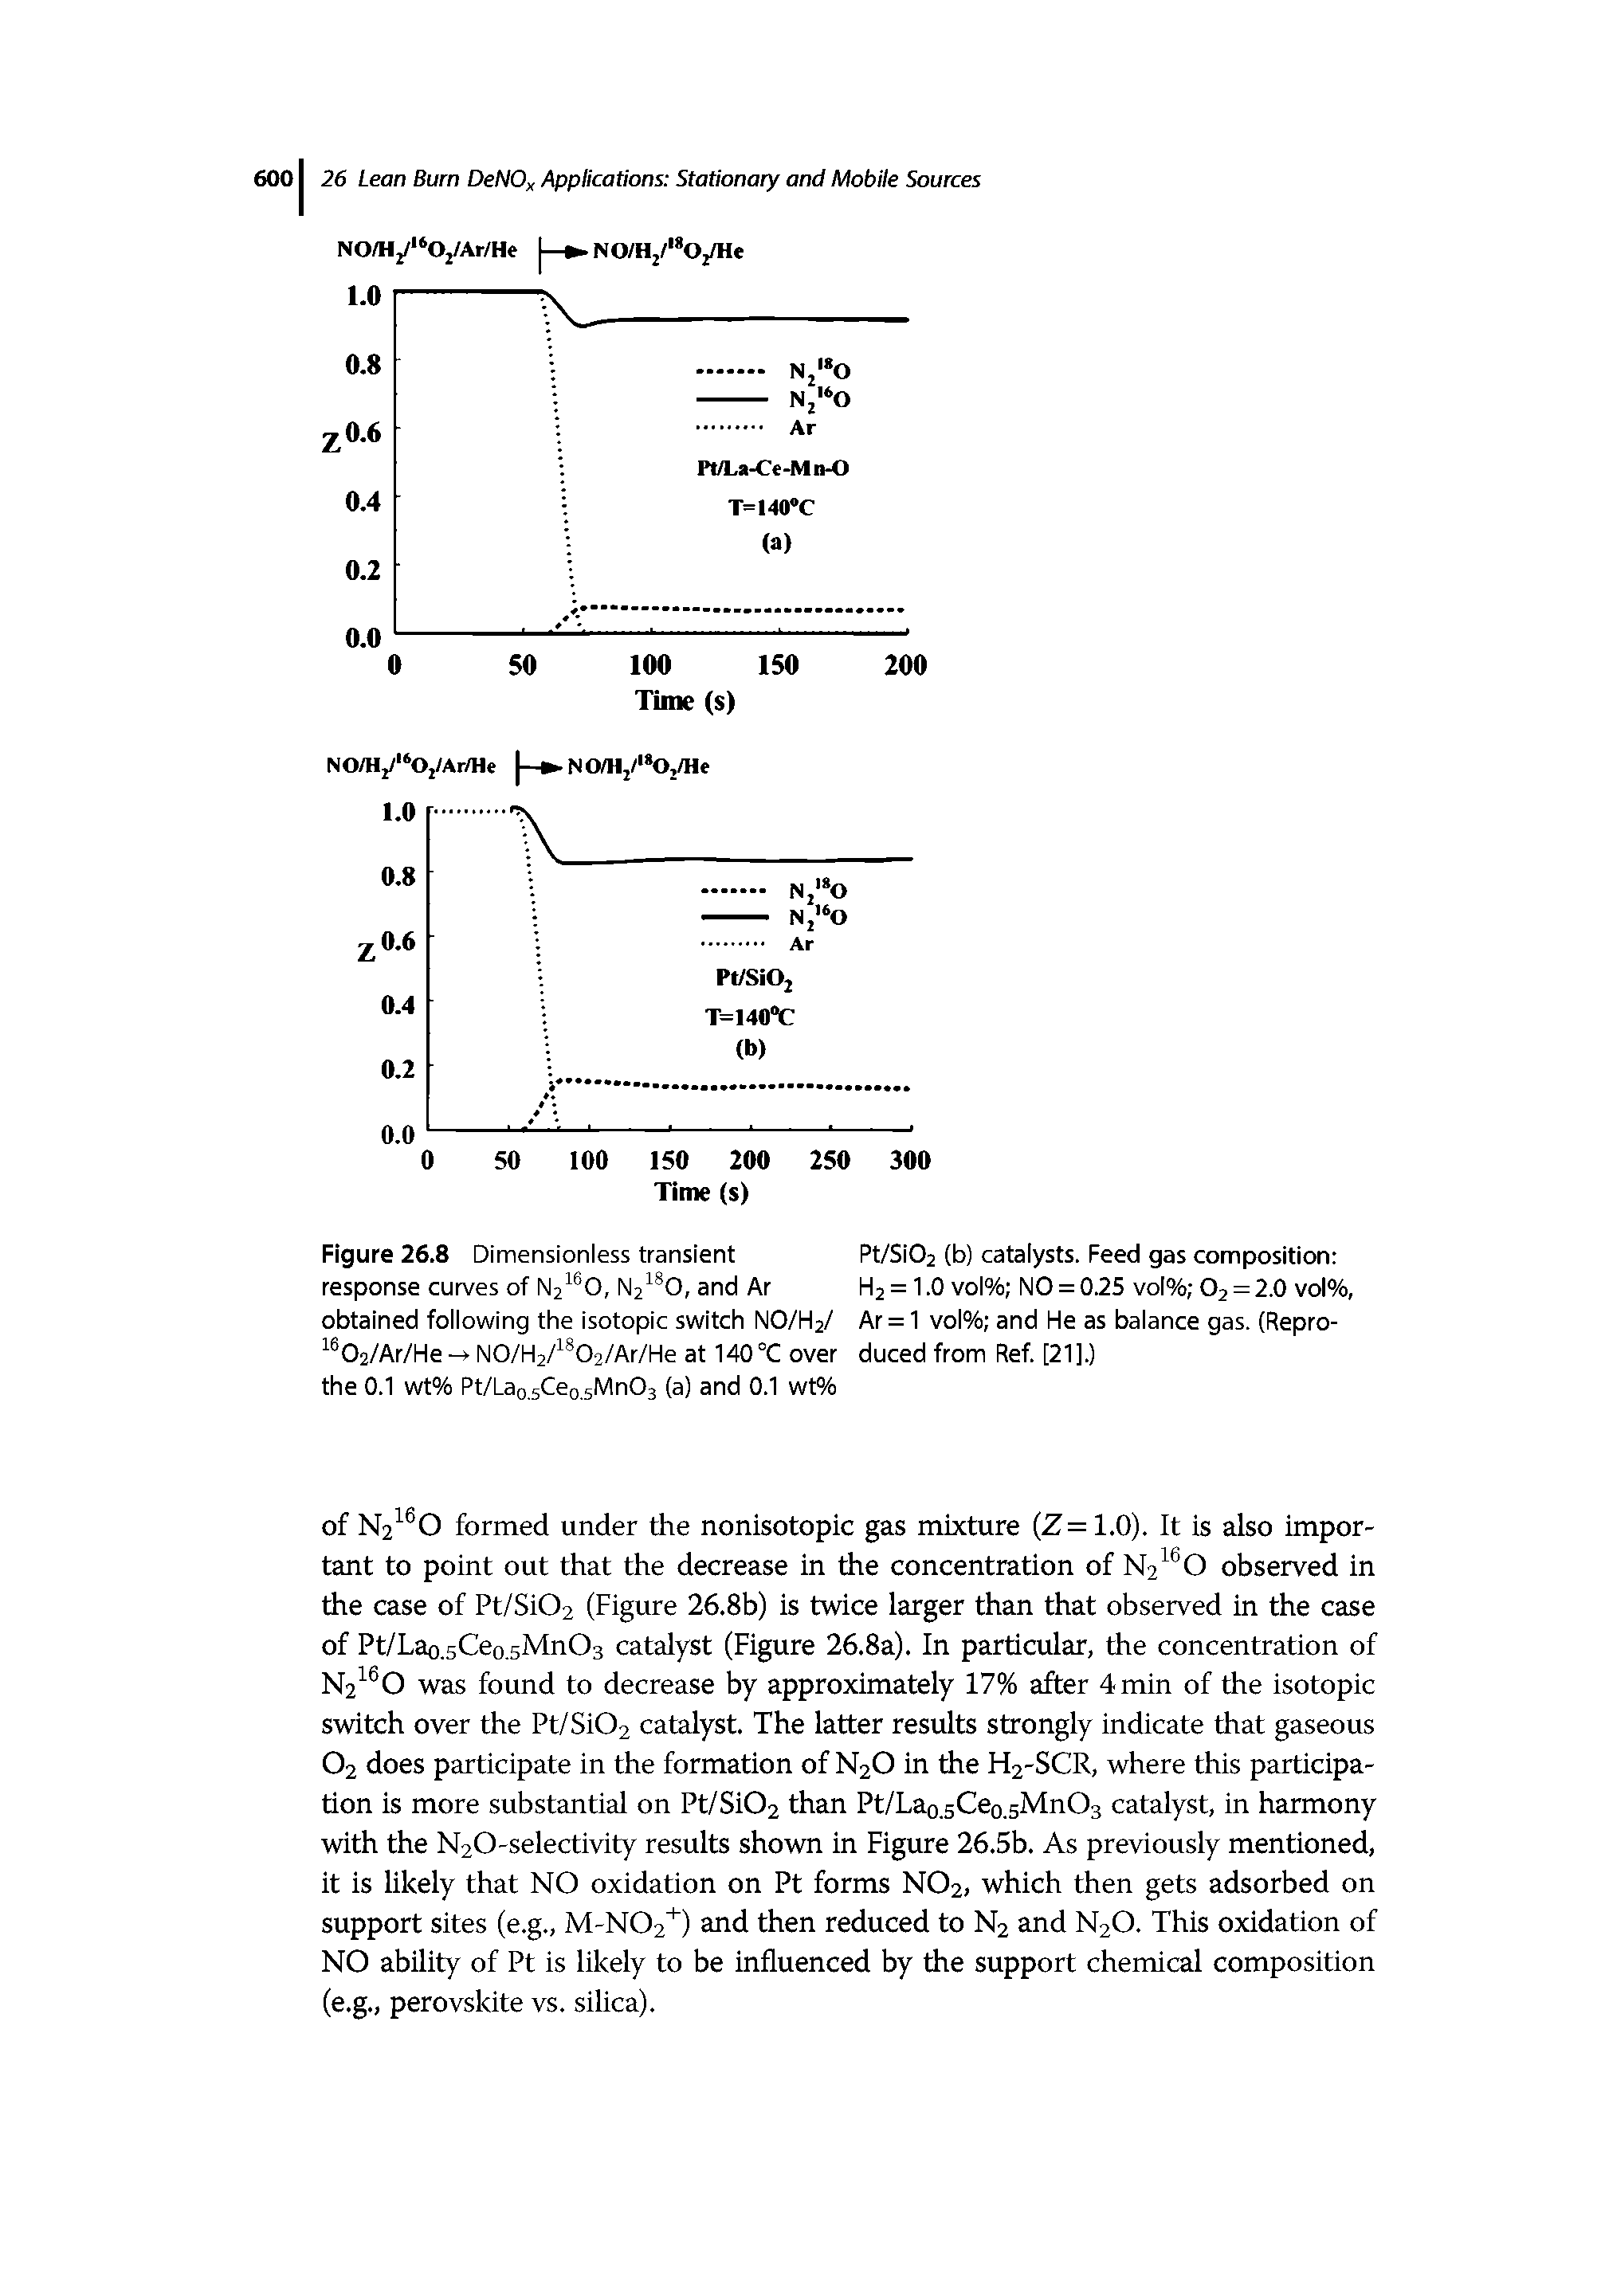 Figure 26.8 Dimensionless transient response curves of N2 0, N2 0, and Ar obtained following the isotopic switch NO/H2/ 02/Ar/He N0/H2/ 02/Ar/He at 140 °C over...